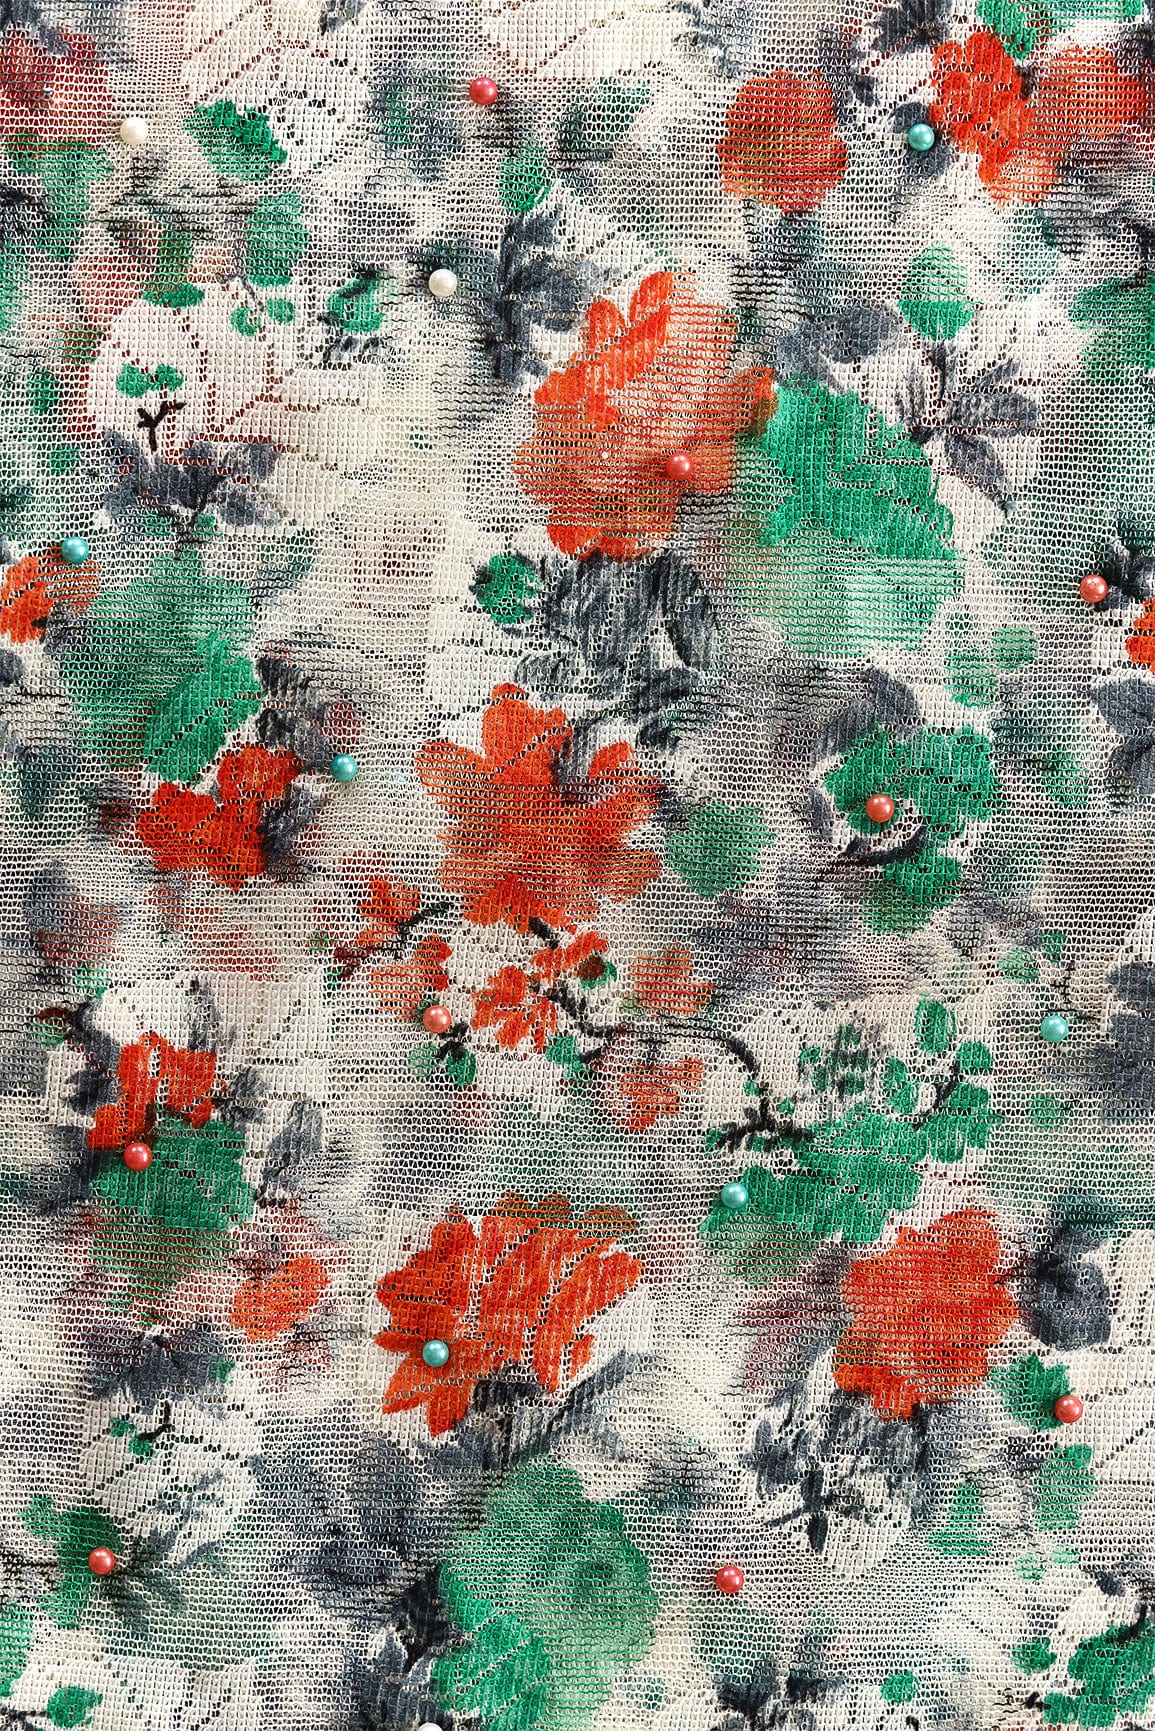 doeraa Embroidery Fabrics Teal And Orange Floral Digital Print With Pearls On Net Fabric